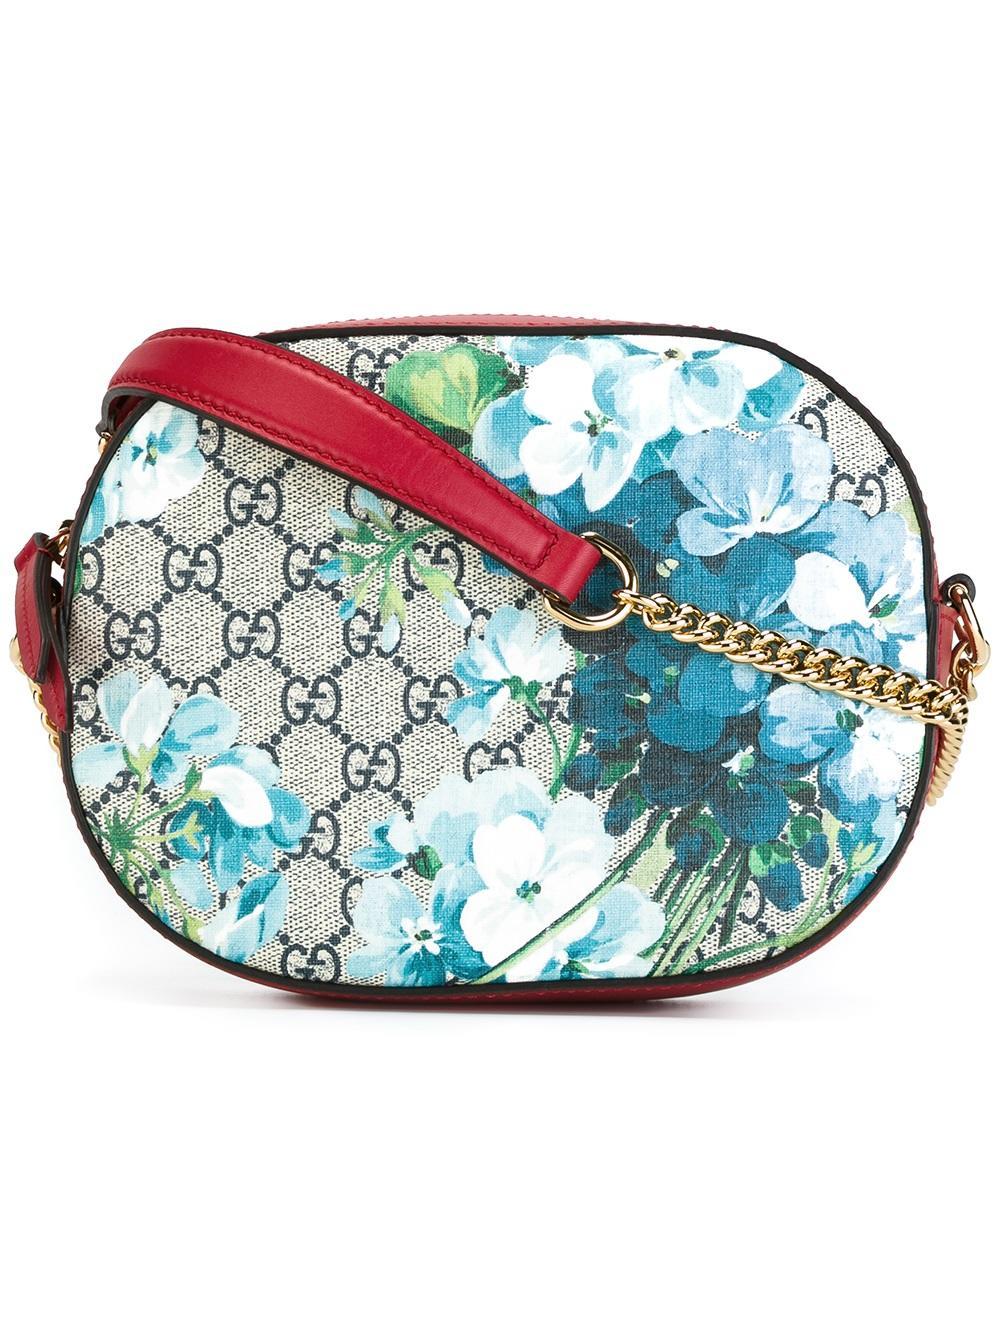 Gucci Leather Floral Print Crossbody Bag in Red - Lyst